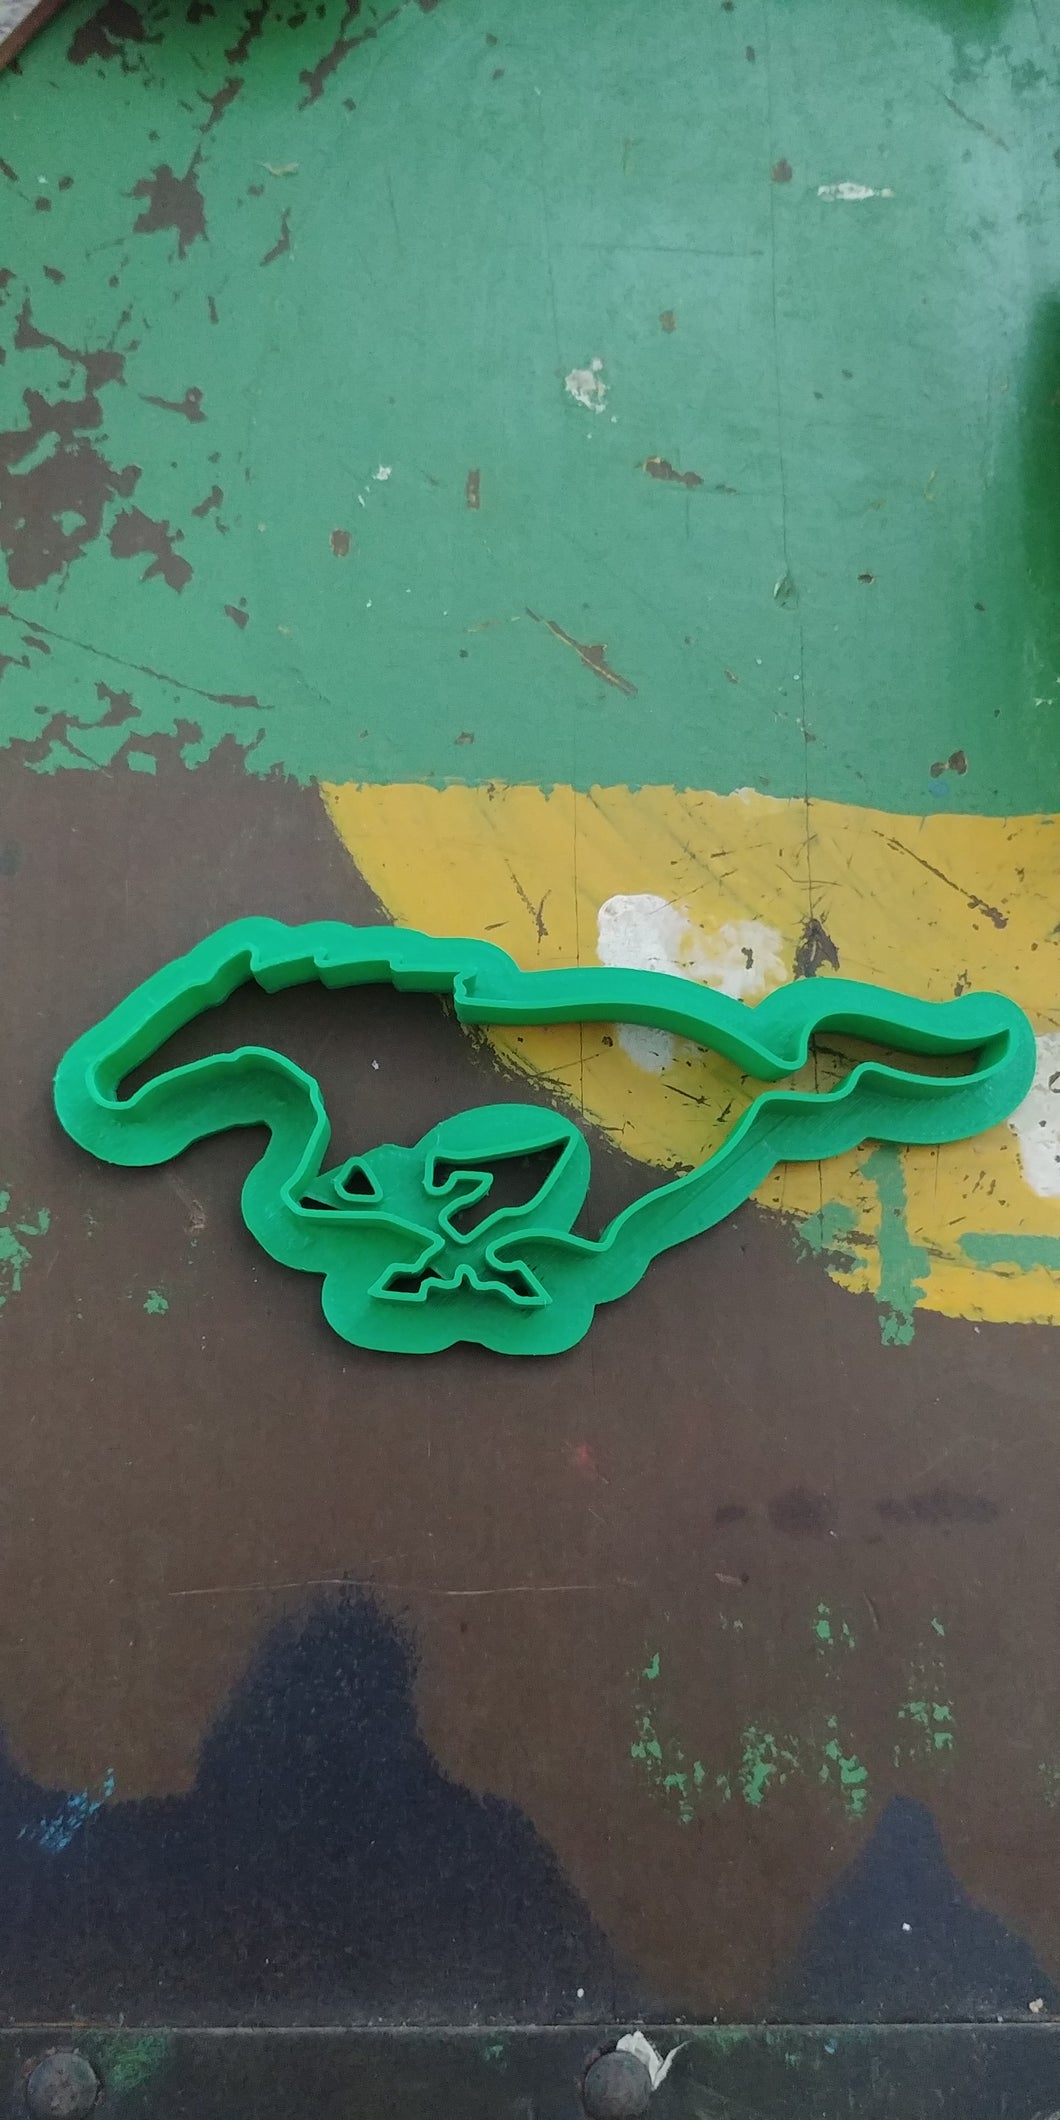 3D Printed Cookie Cutter Inspired by Ford Mustang Emblem